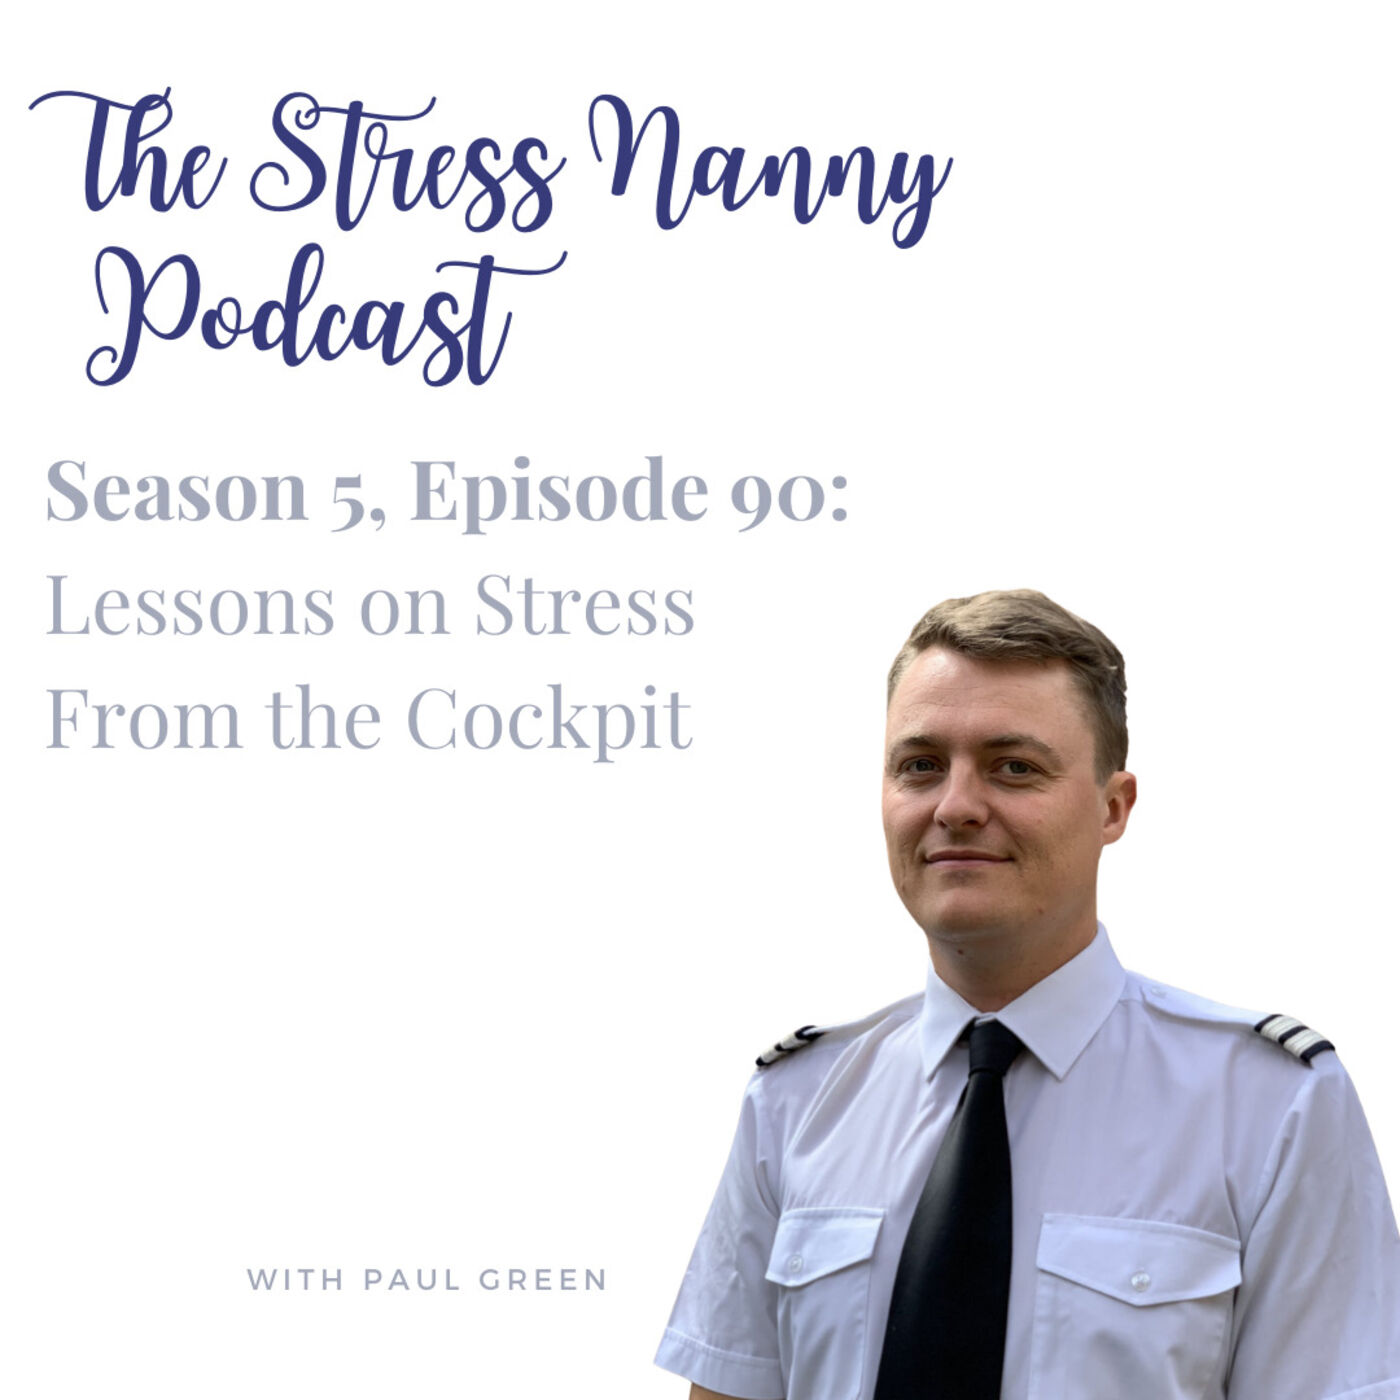 Lessons on Stress From the Cockpit